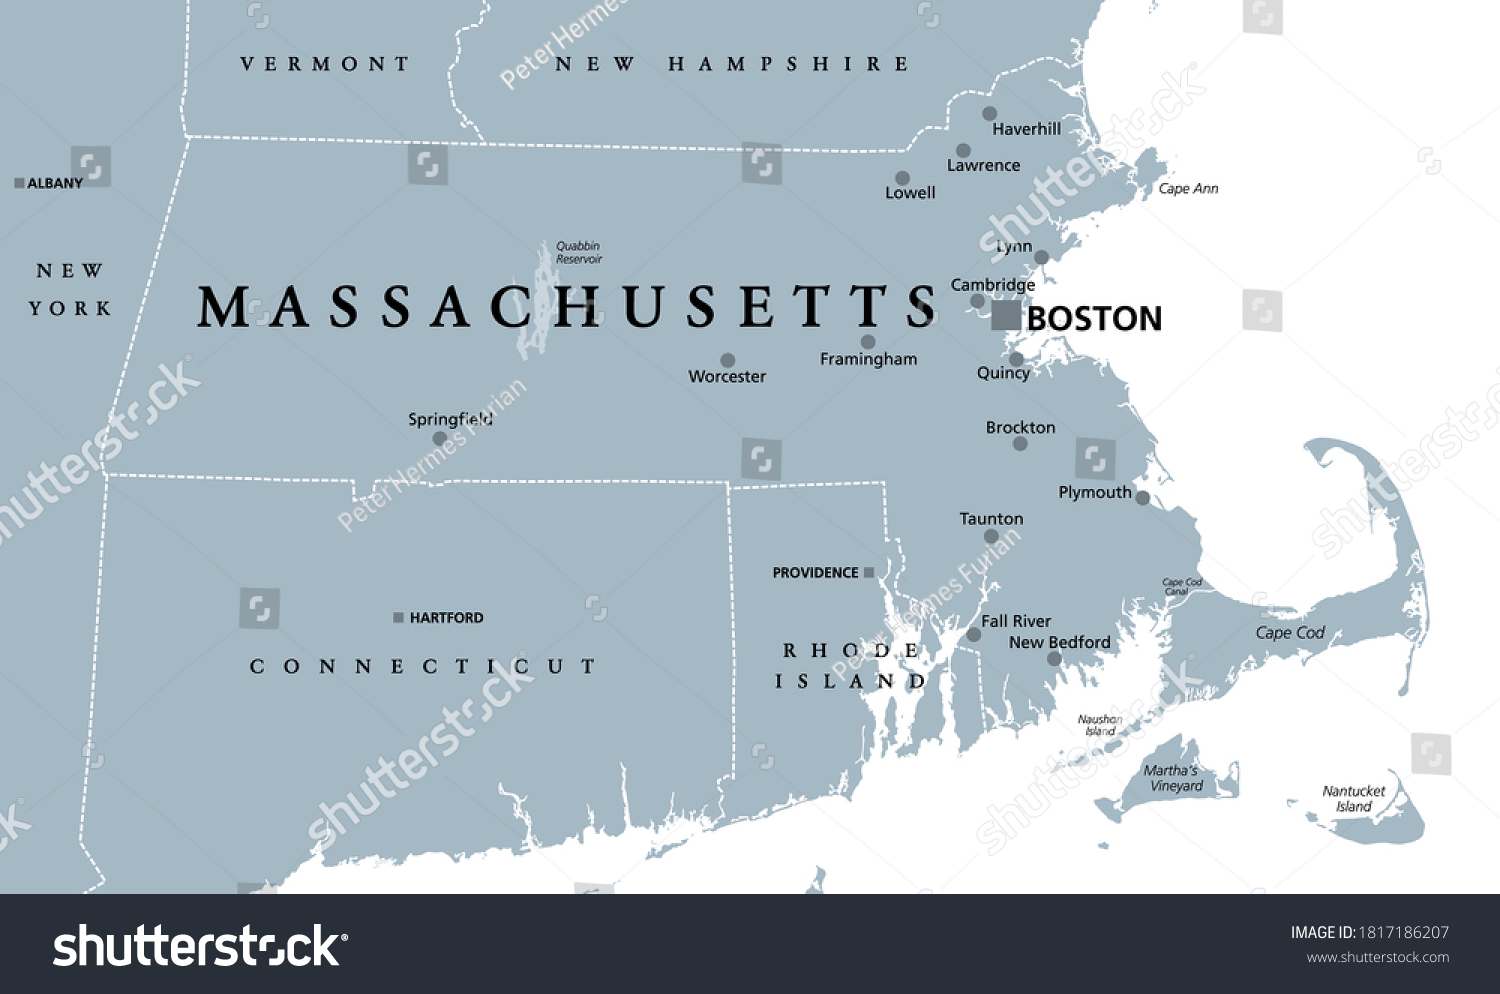 SVG of Massachusetts, gray political map, with capital Boston. Commonwealth of Massachusetts, MA. Most populous state in the New England region of United States. The Bay State. English. Illustration. Vector. svg